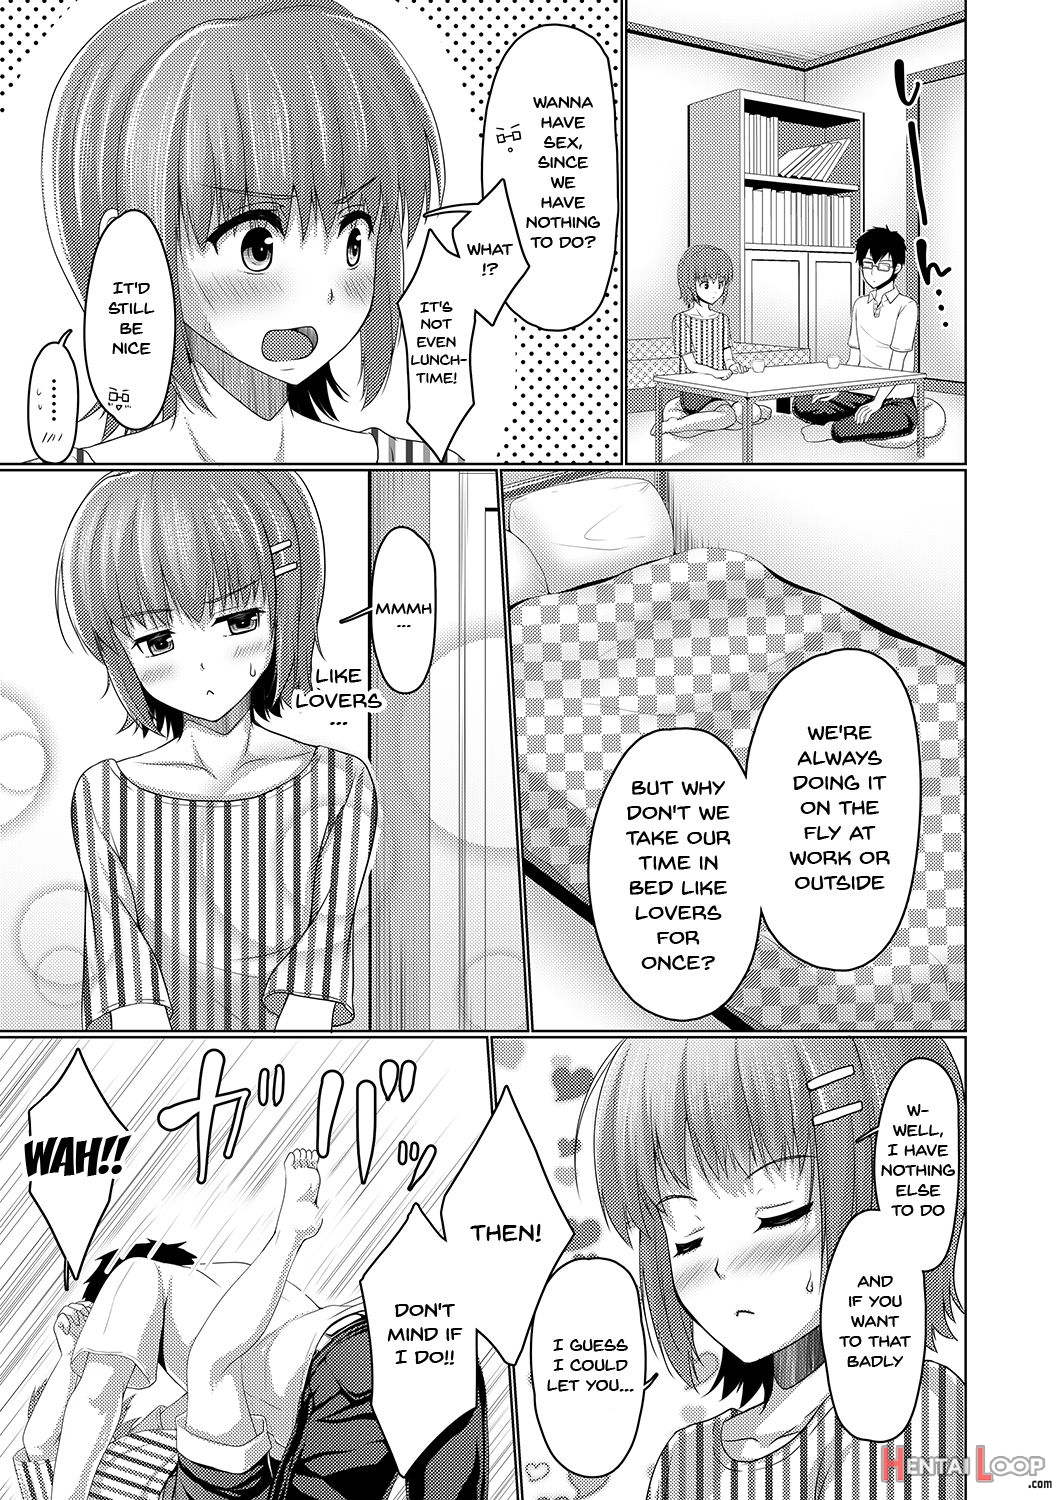 An Eroge Writer Whose Work Never Sells Decided To Crossdress So He Could Understand How Women Feel page 3